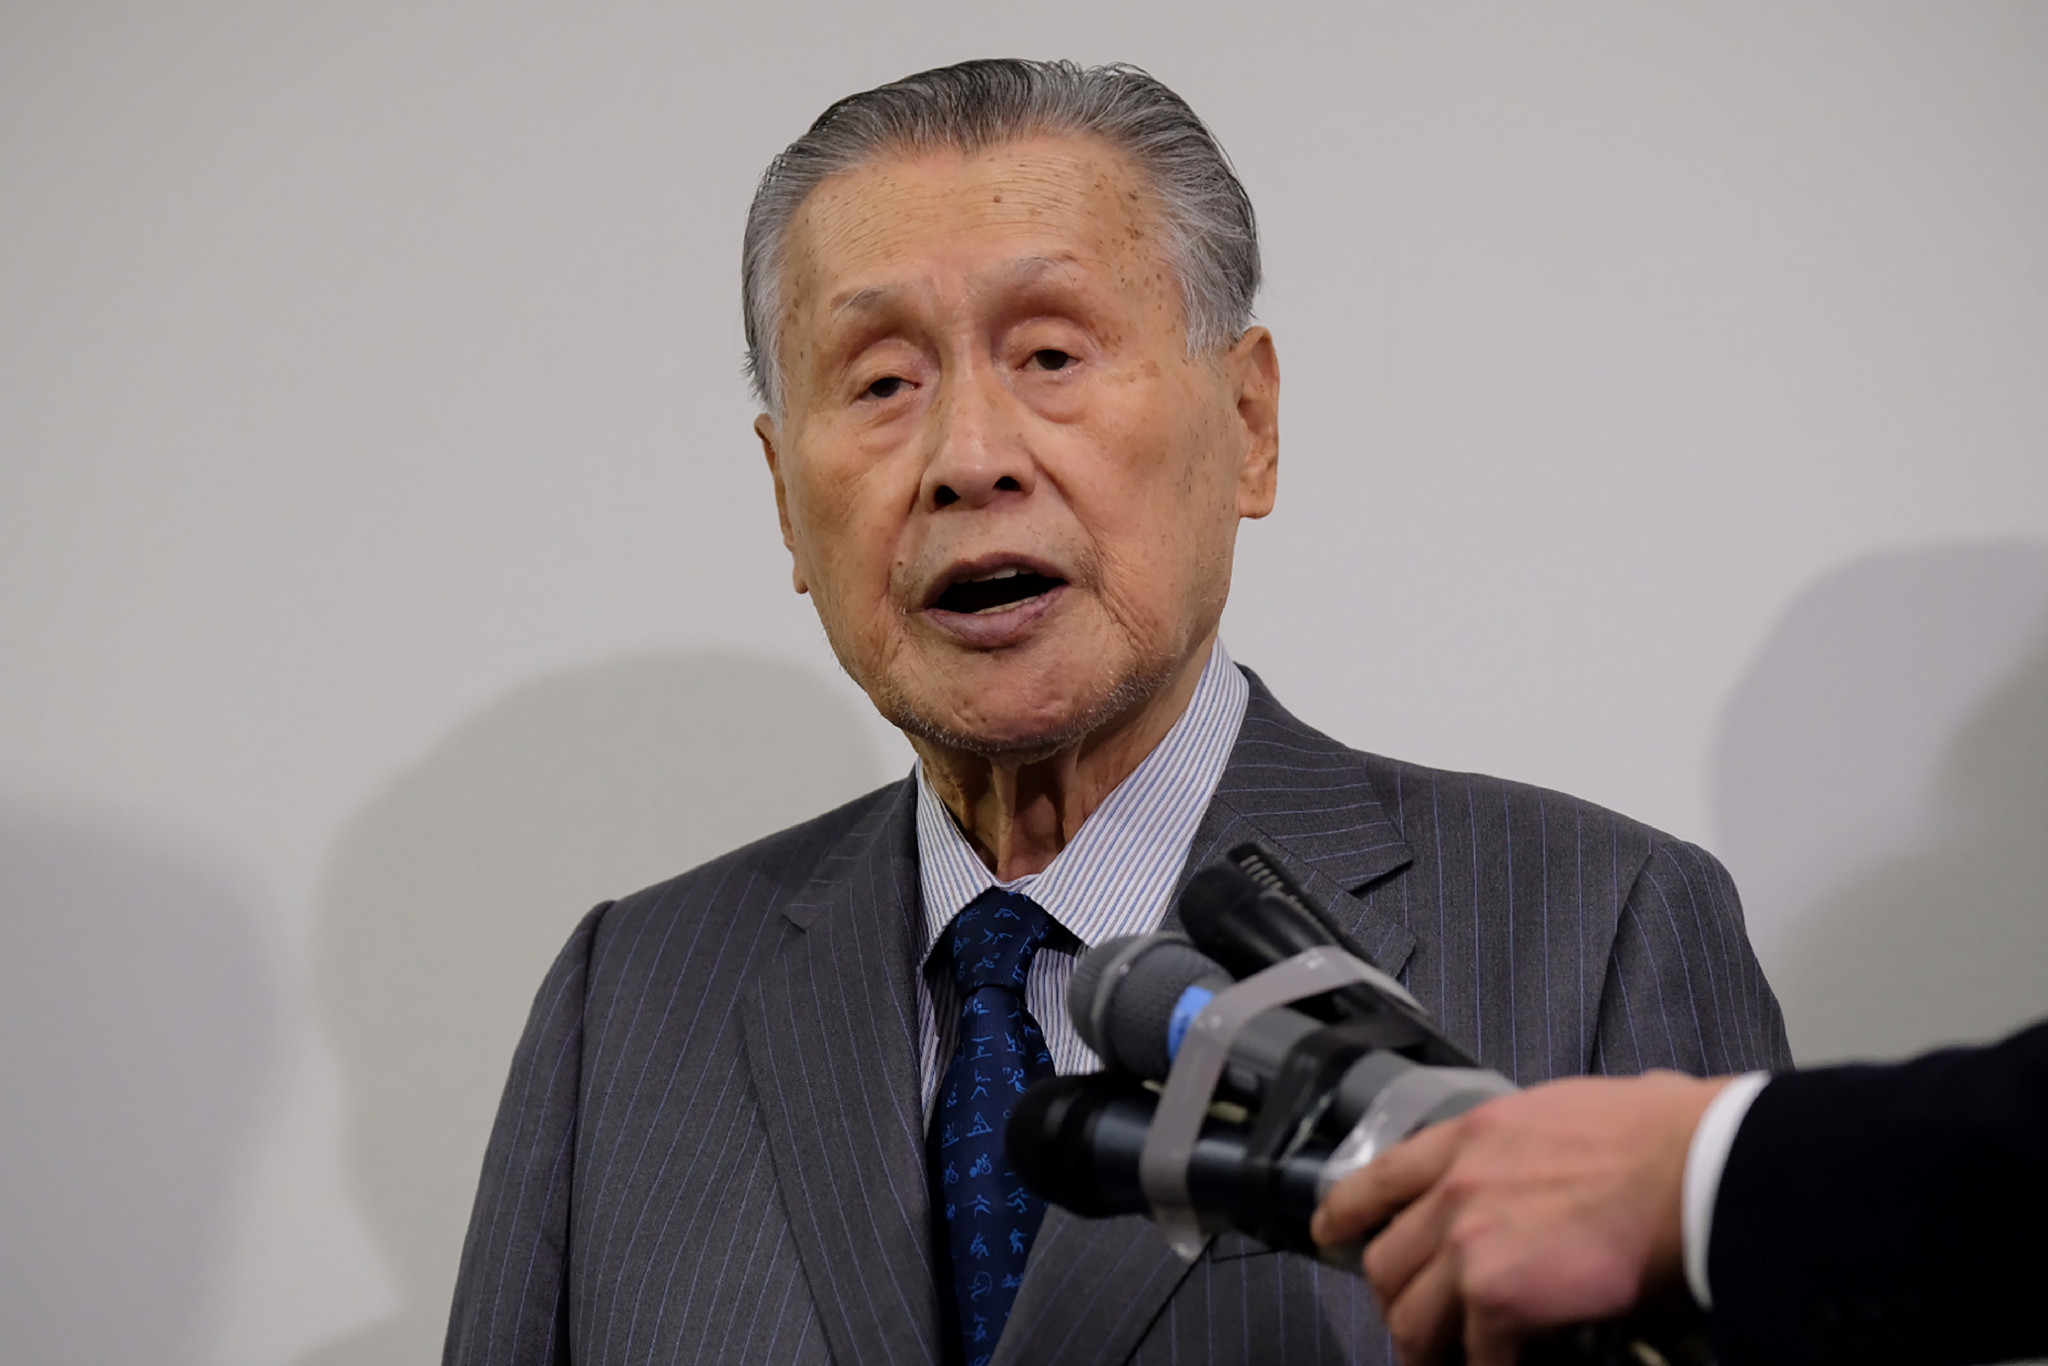 Tokyo 2020 President Yoshirō Mori has warned the Olympic and Paralympic Games could not be delayed again if the pandemic is still an issue next year ©Getty Images